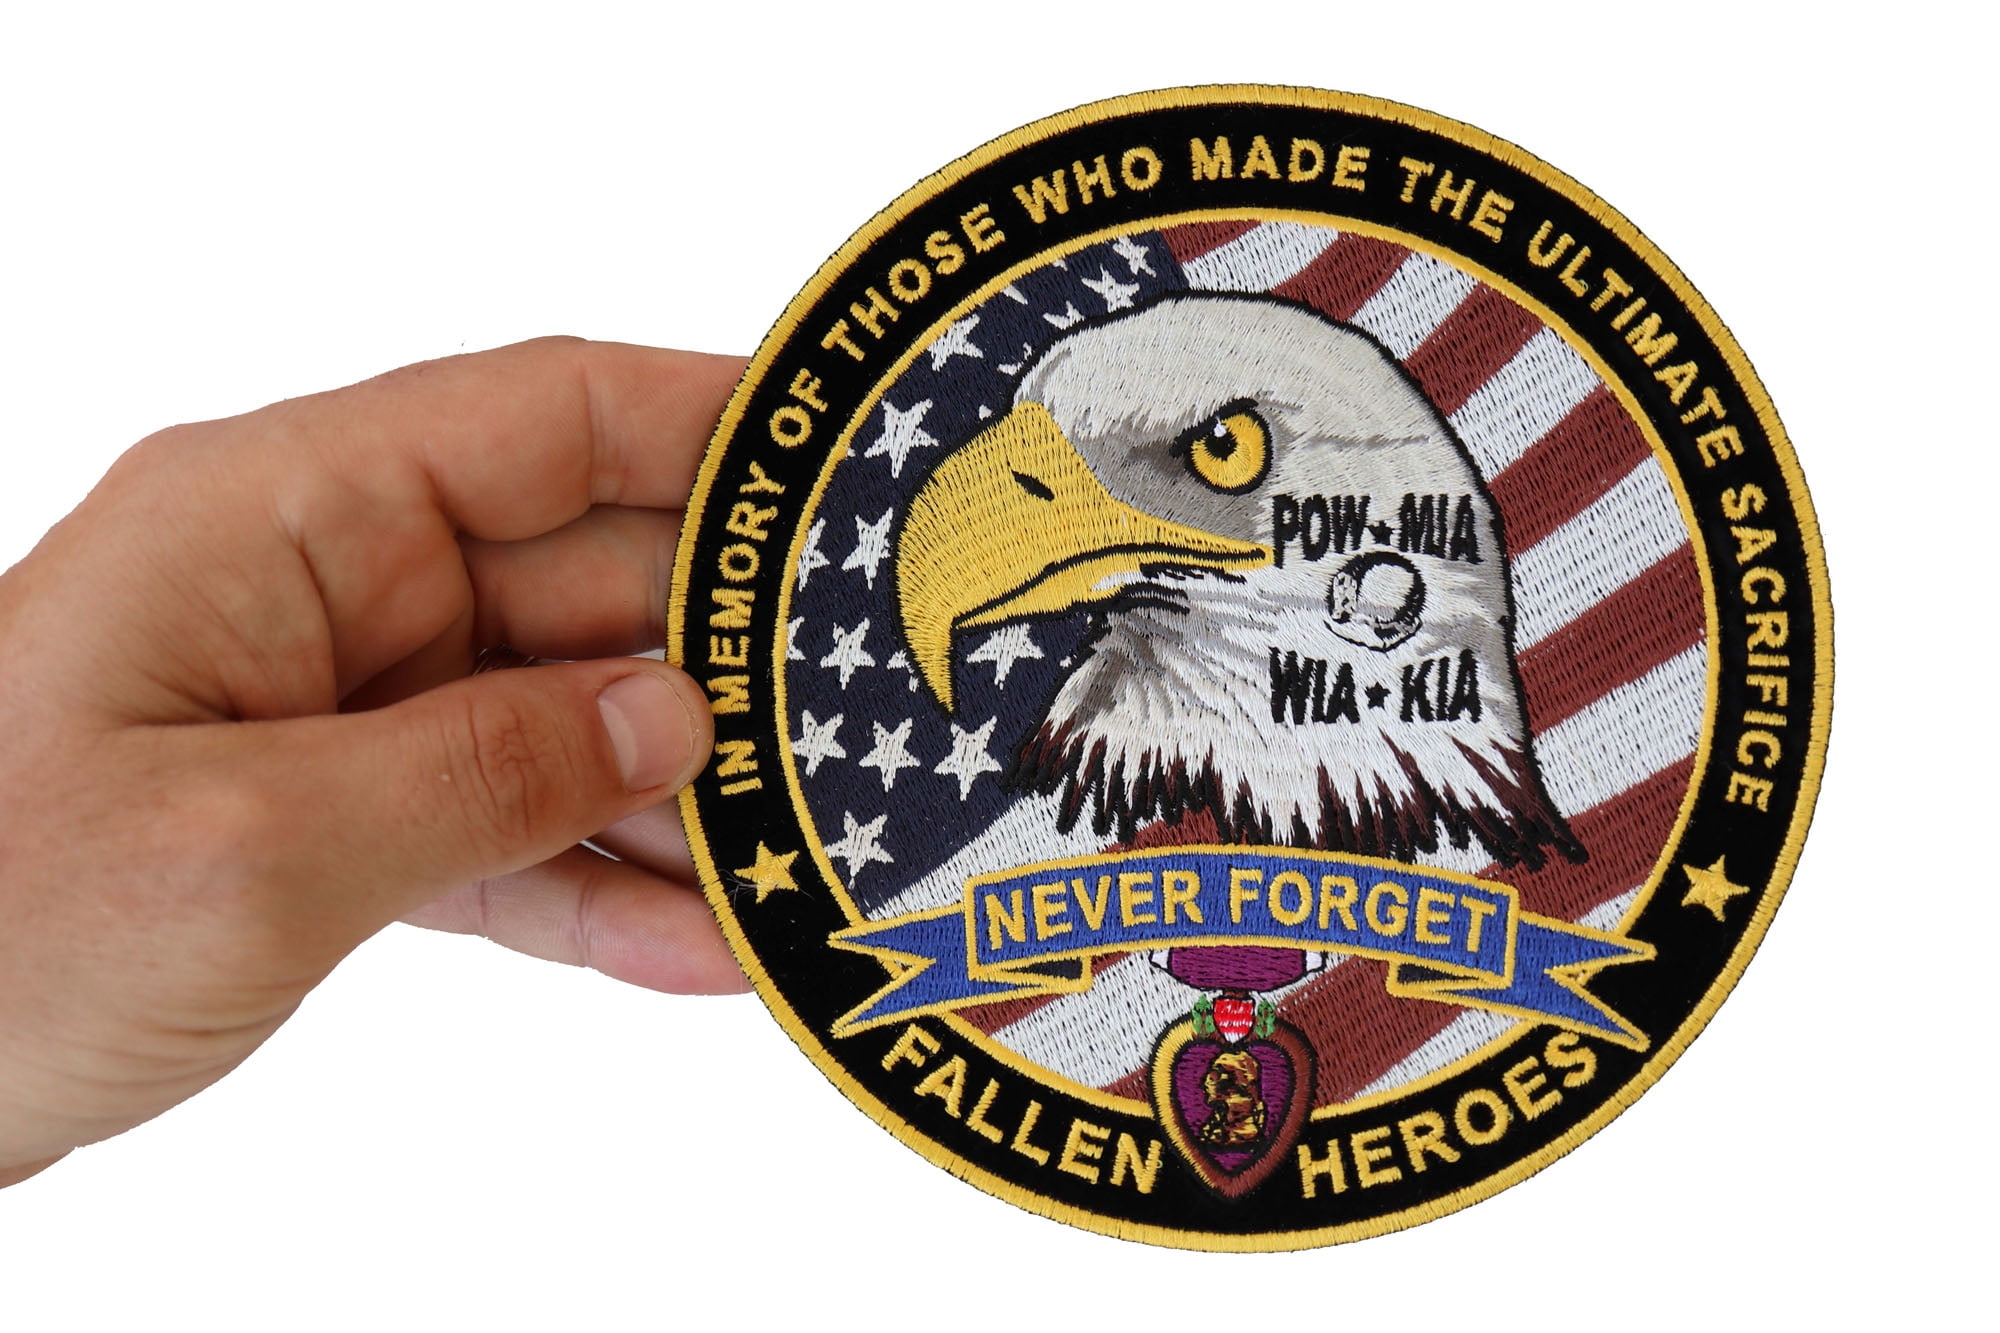 Fallen Heroes Never Forget Pow Mia WIA Kia in Memory of Those Who Made The Ultimate Sacrifice Patch, Large Patriotic Patches